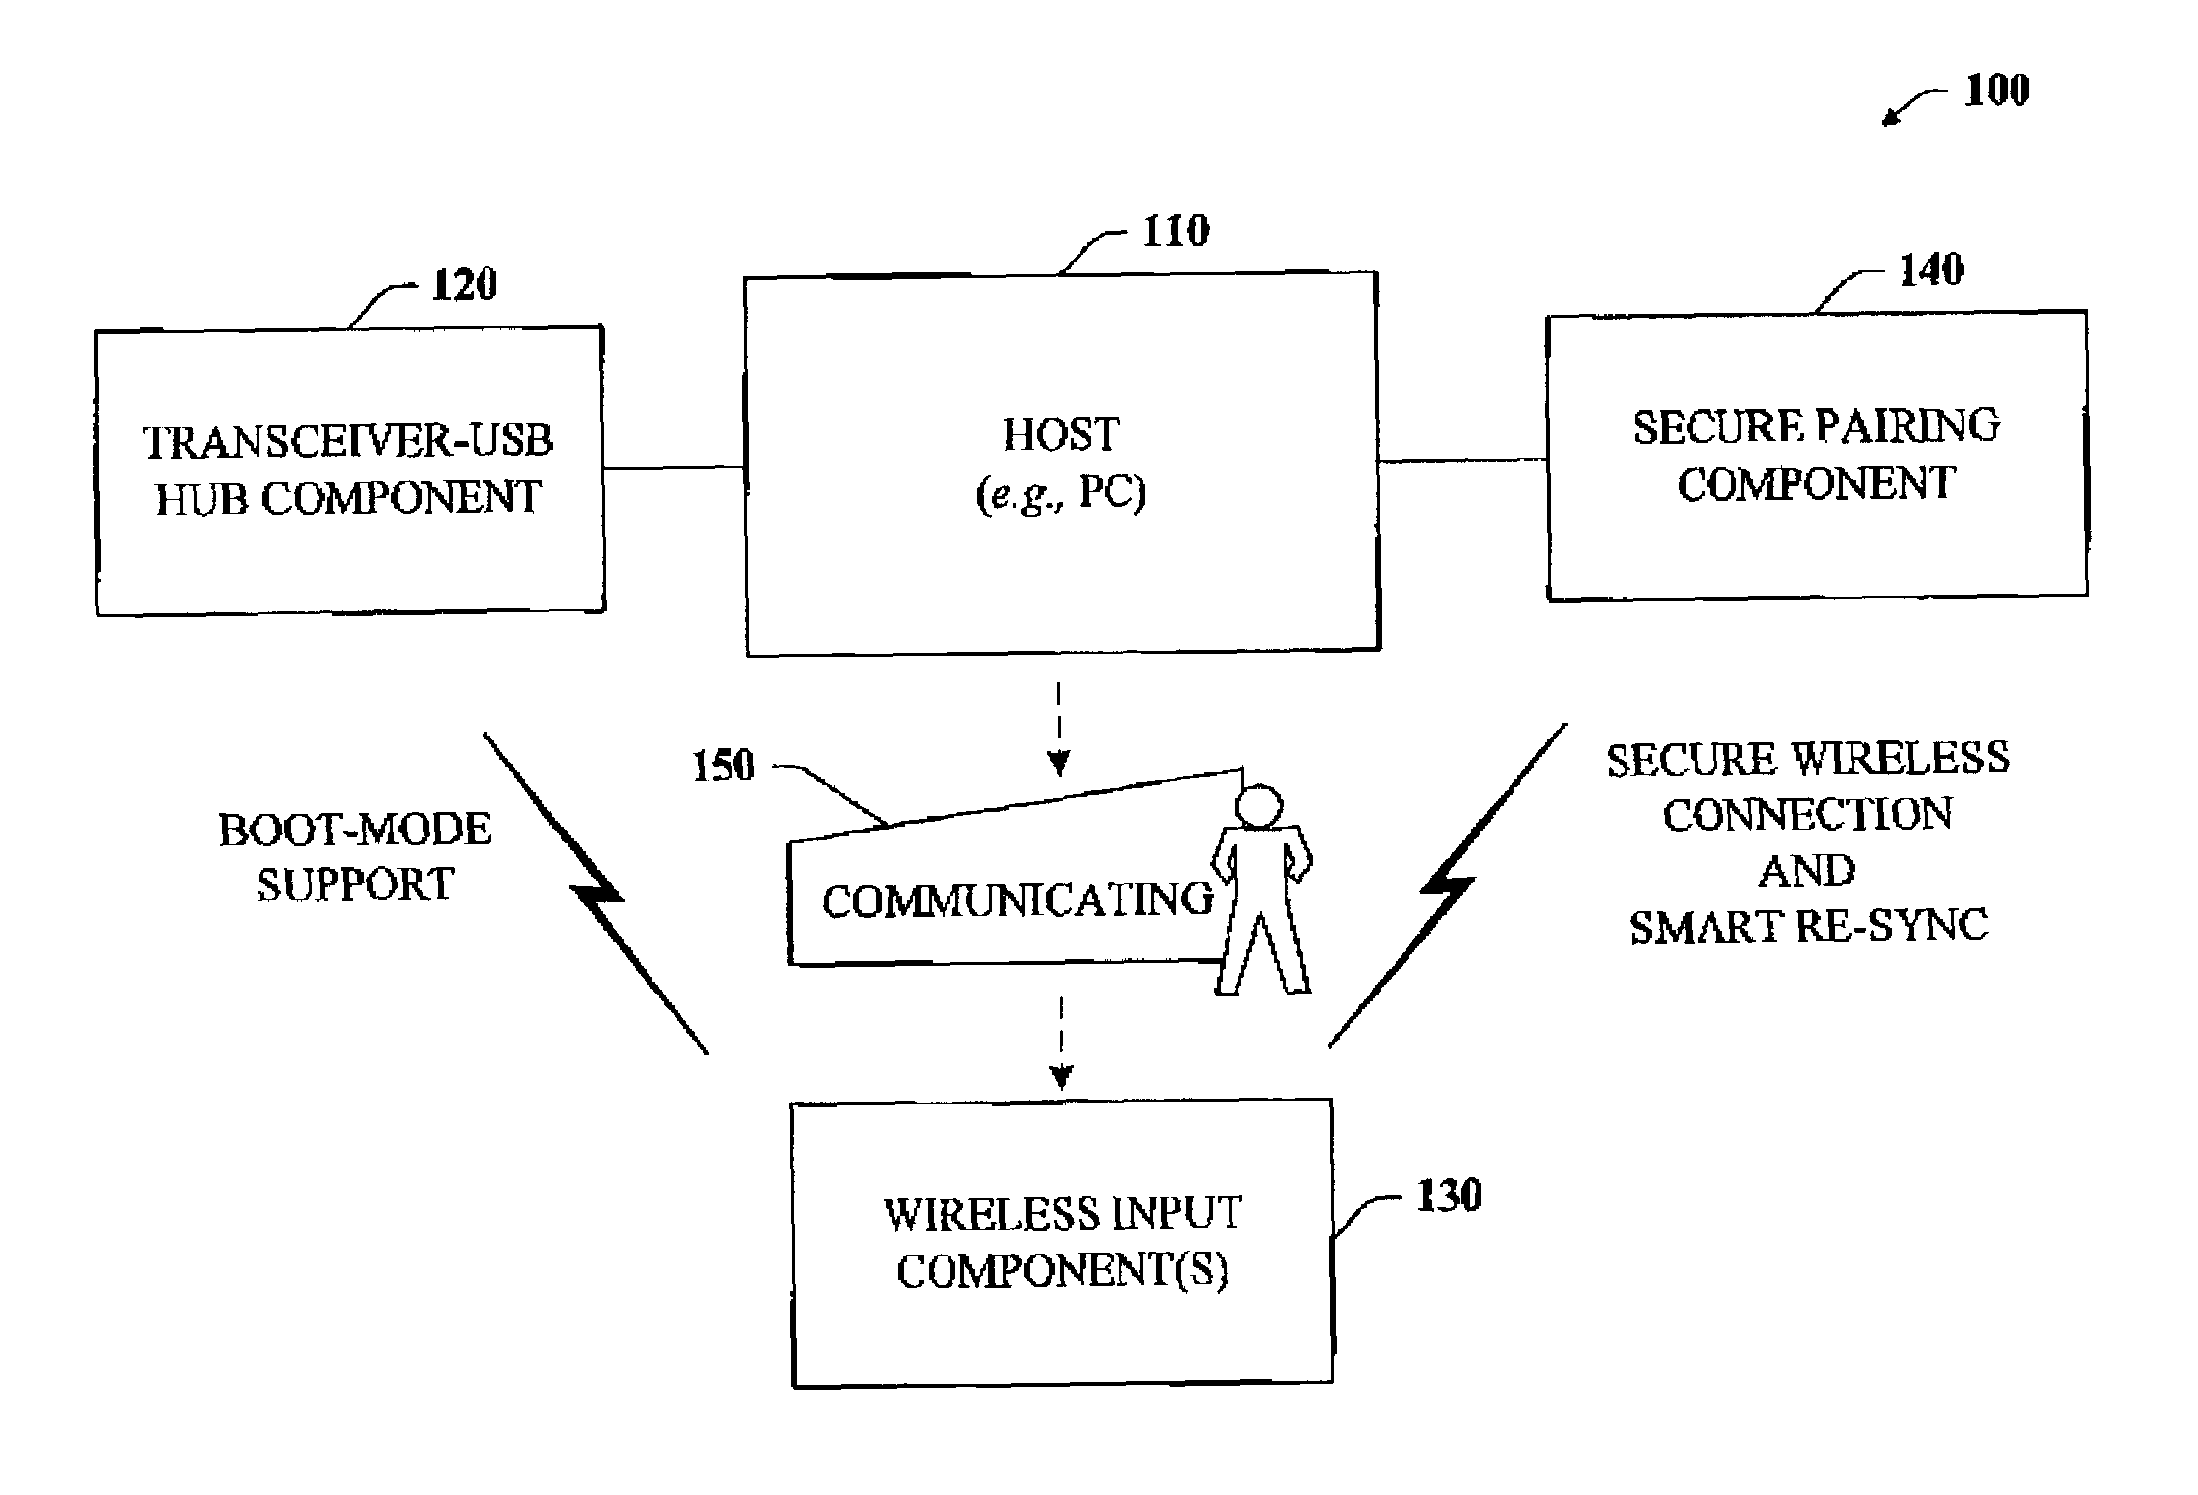 Wireless device support for electronic devices